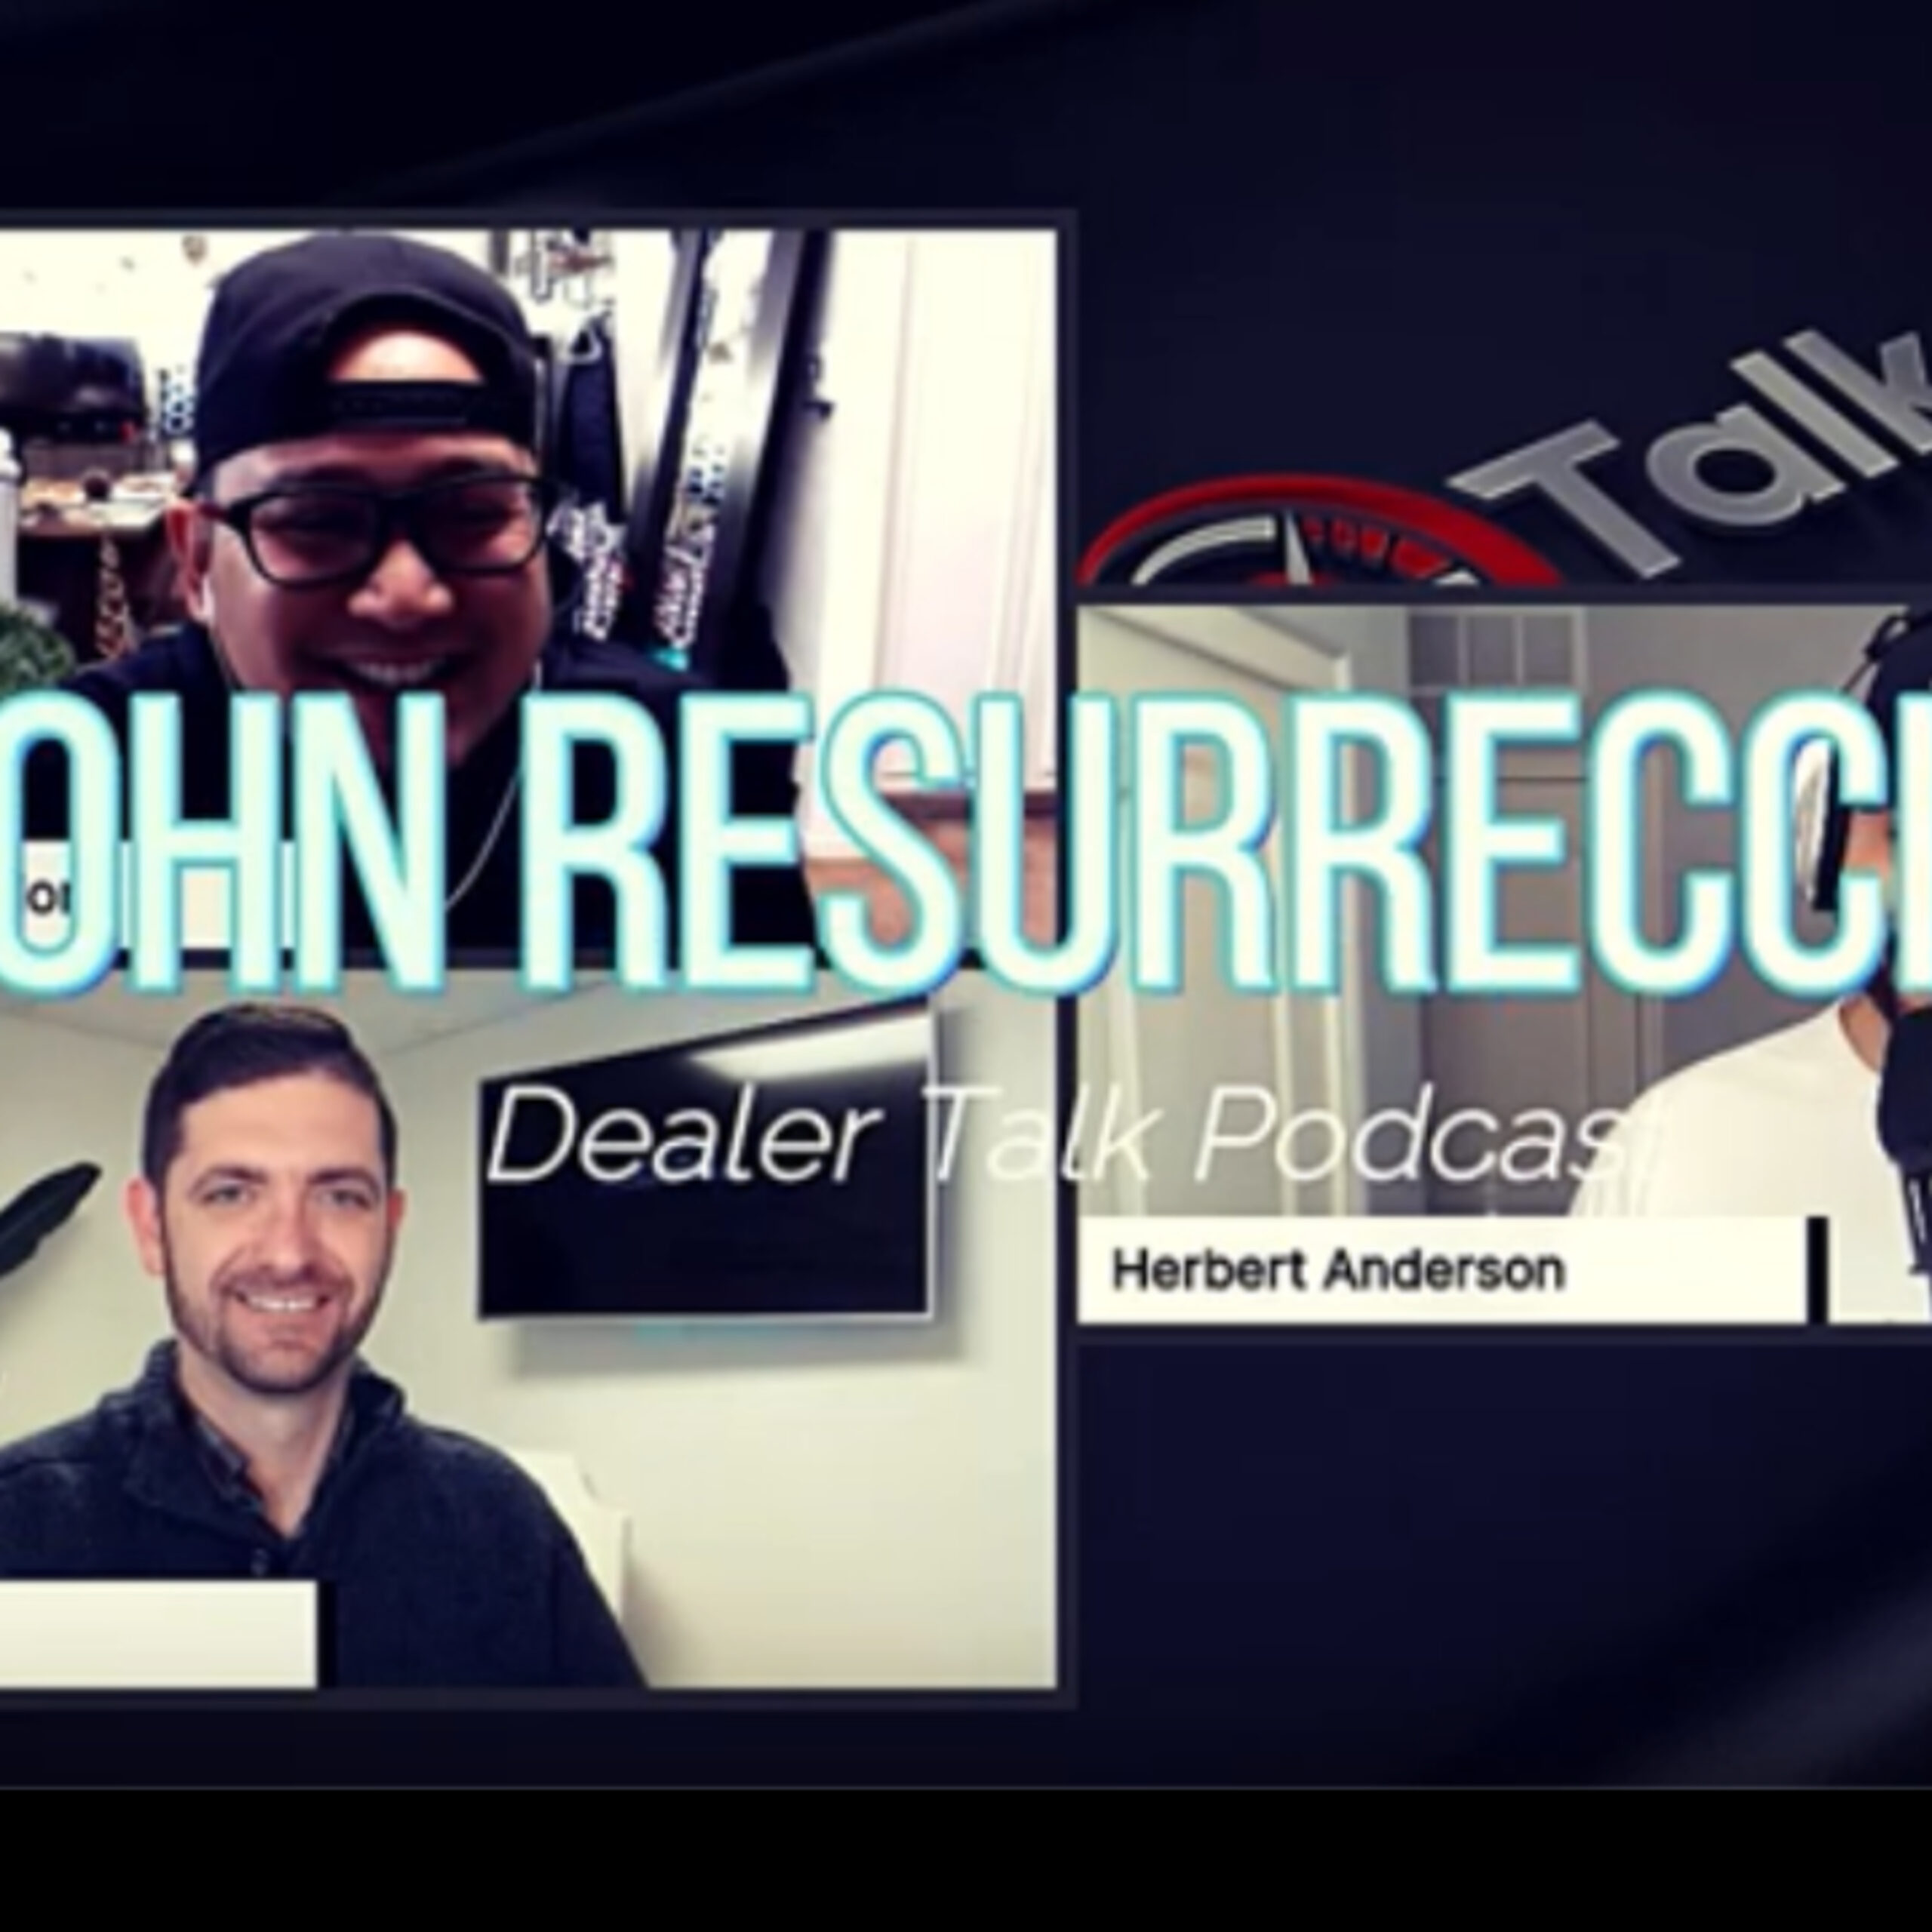 You are currently viewing John Resurreccion Part 2 – Website; Best Sales Person in the Dealership and Using Video Effectively